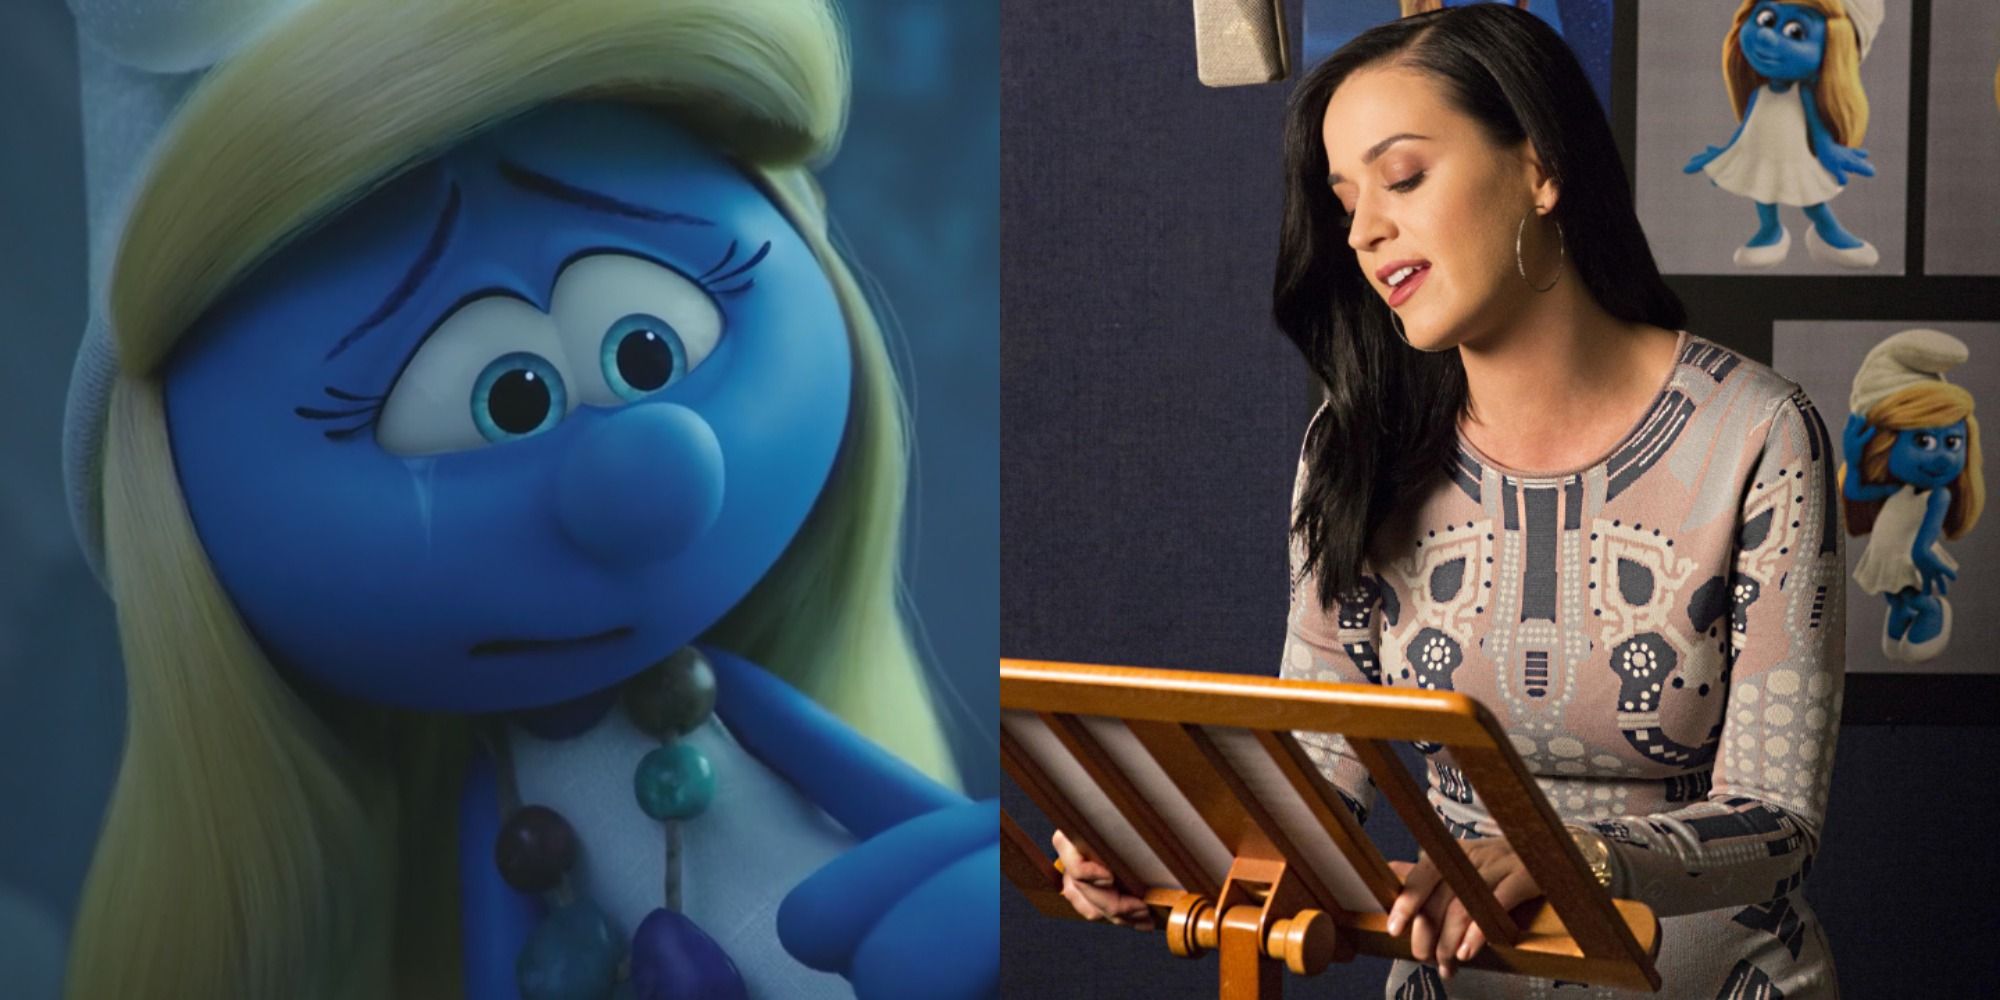 Katy Perry voice acting as Smurfette in The Smurfs.